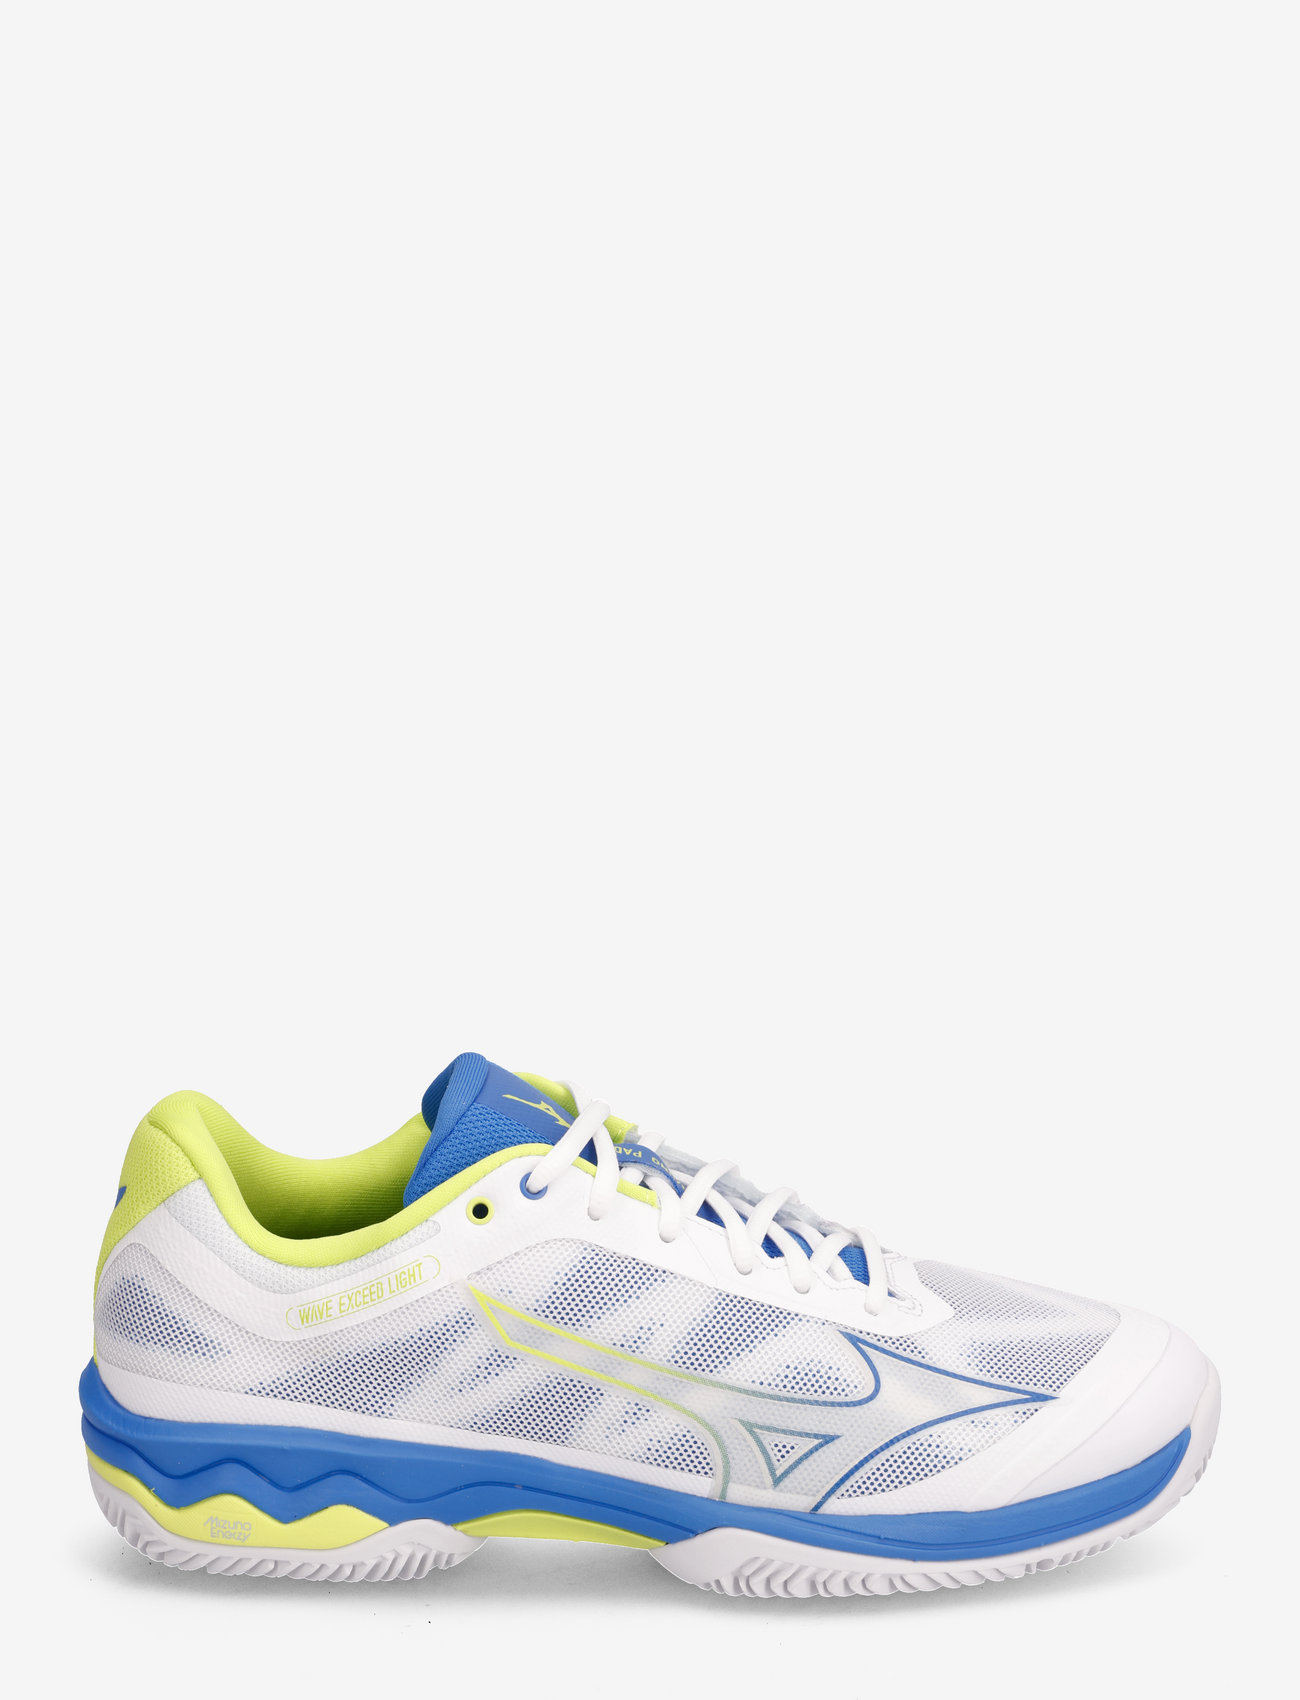 Mizuno - WAVE EXCEED LGTPADEL(M) - racketsports shoes - white/peace blue/acid lime - 1